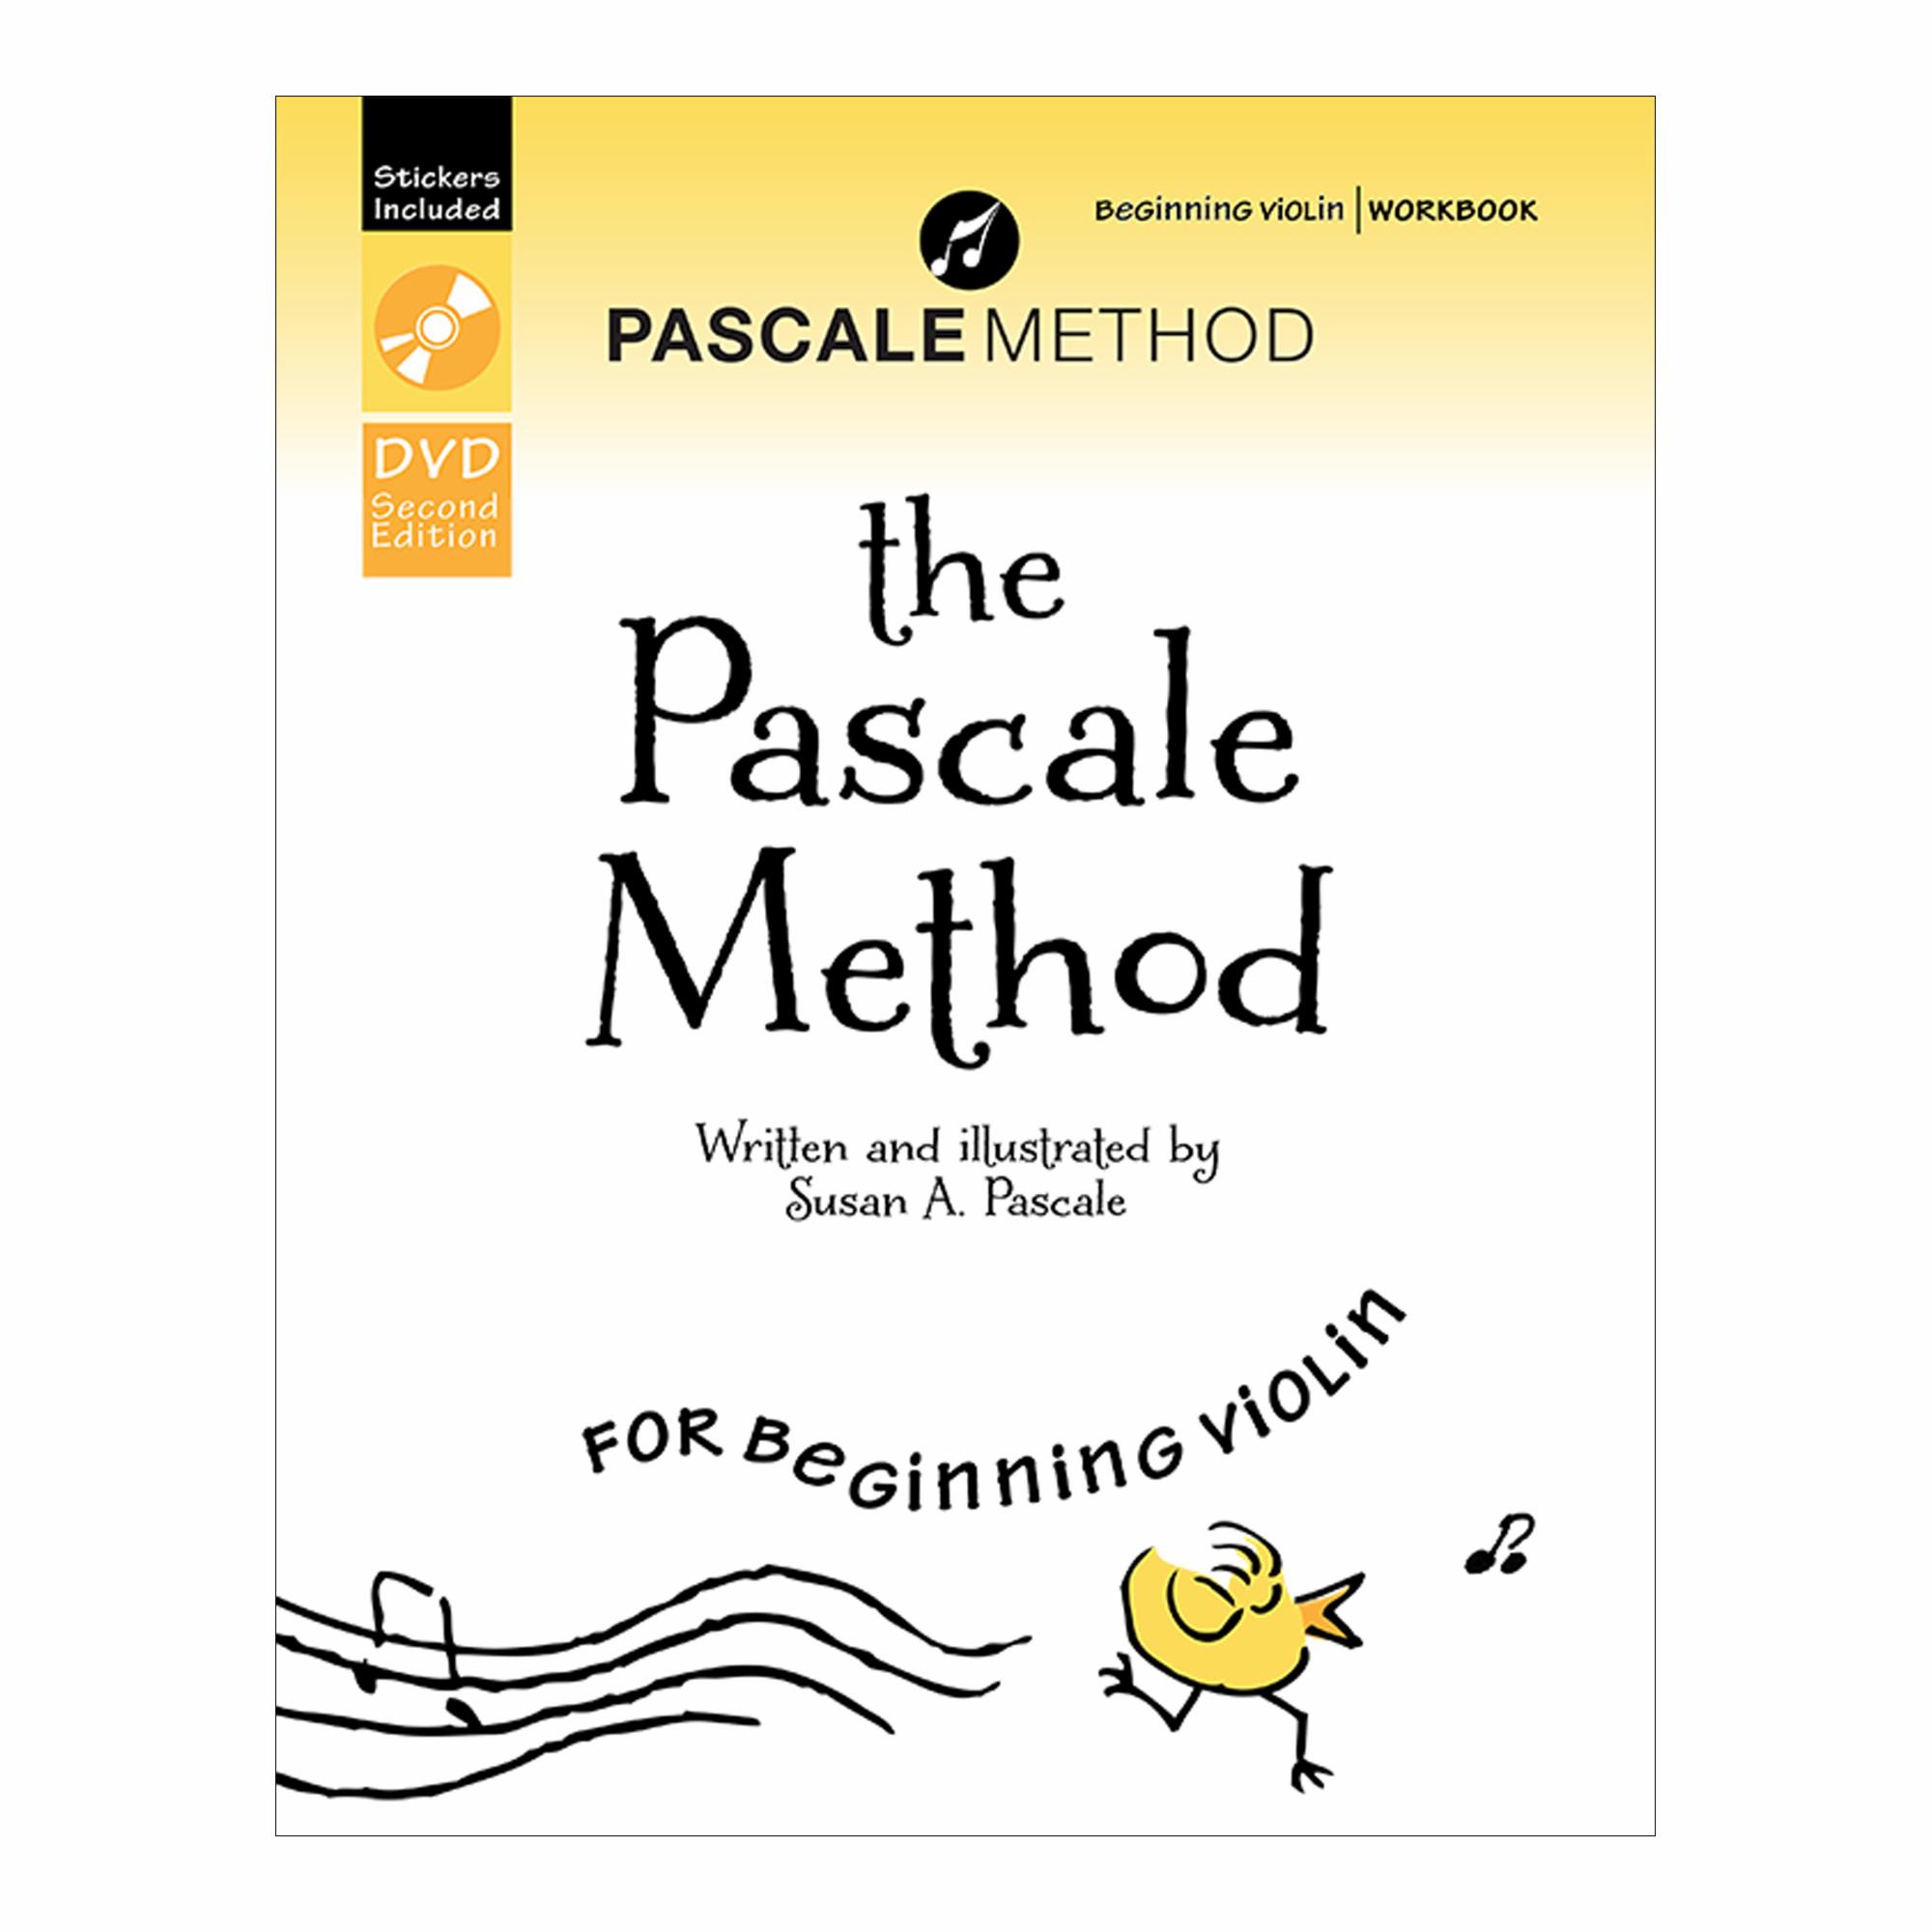 The Pascale Method for Beginning Violin